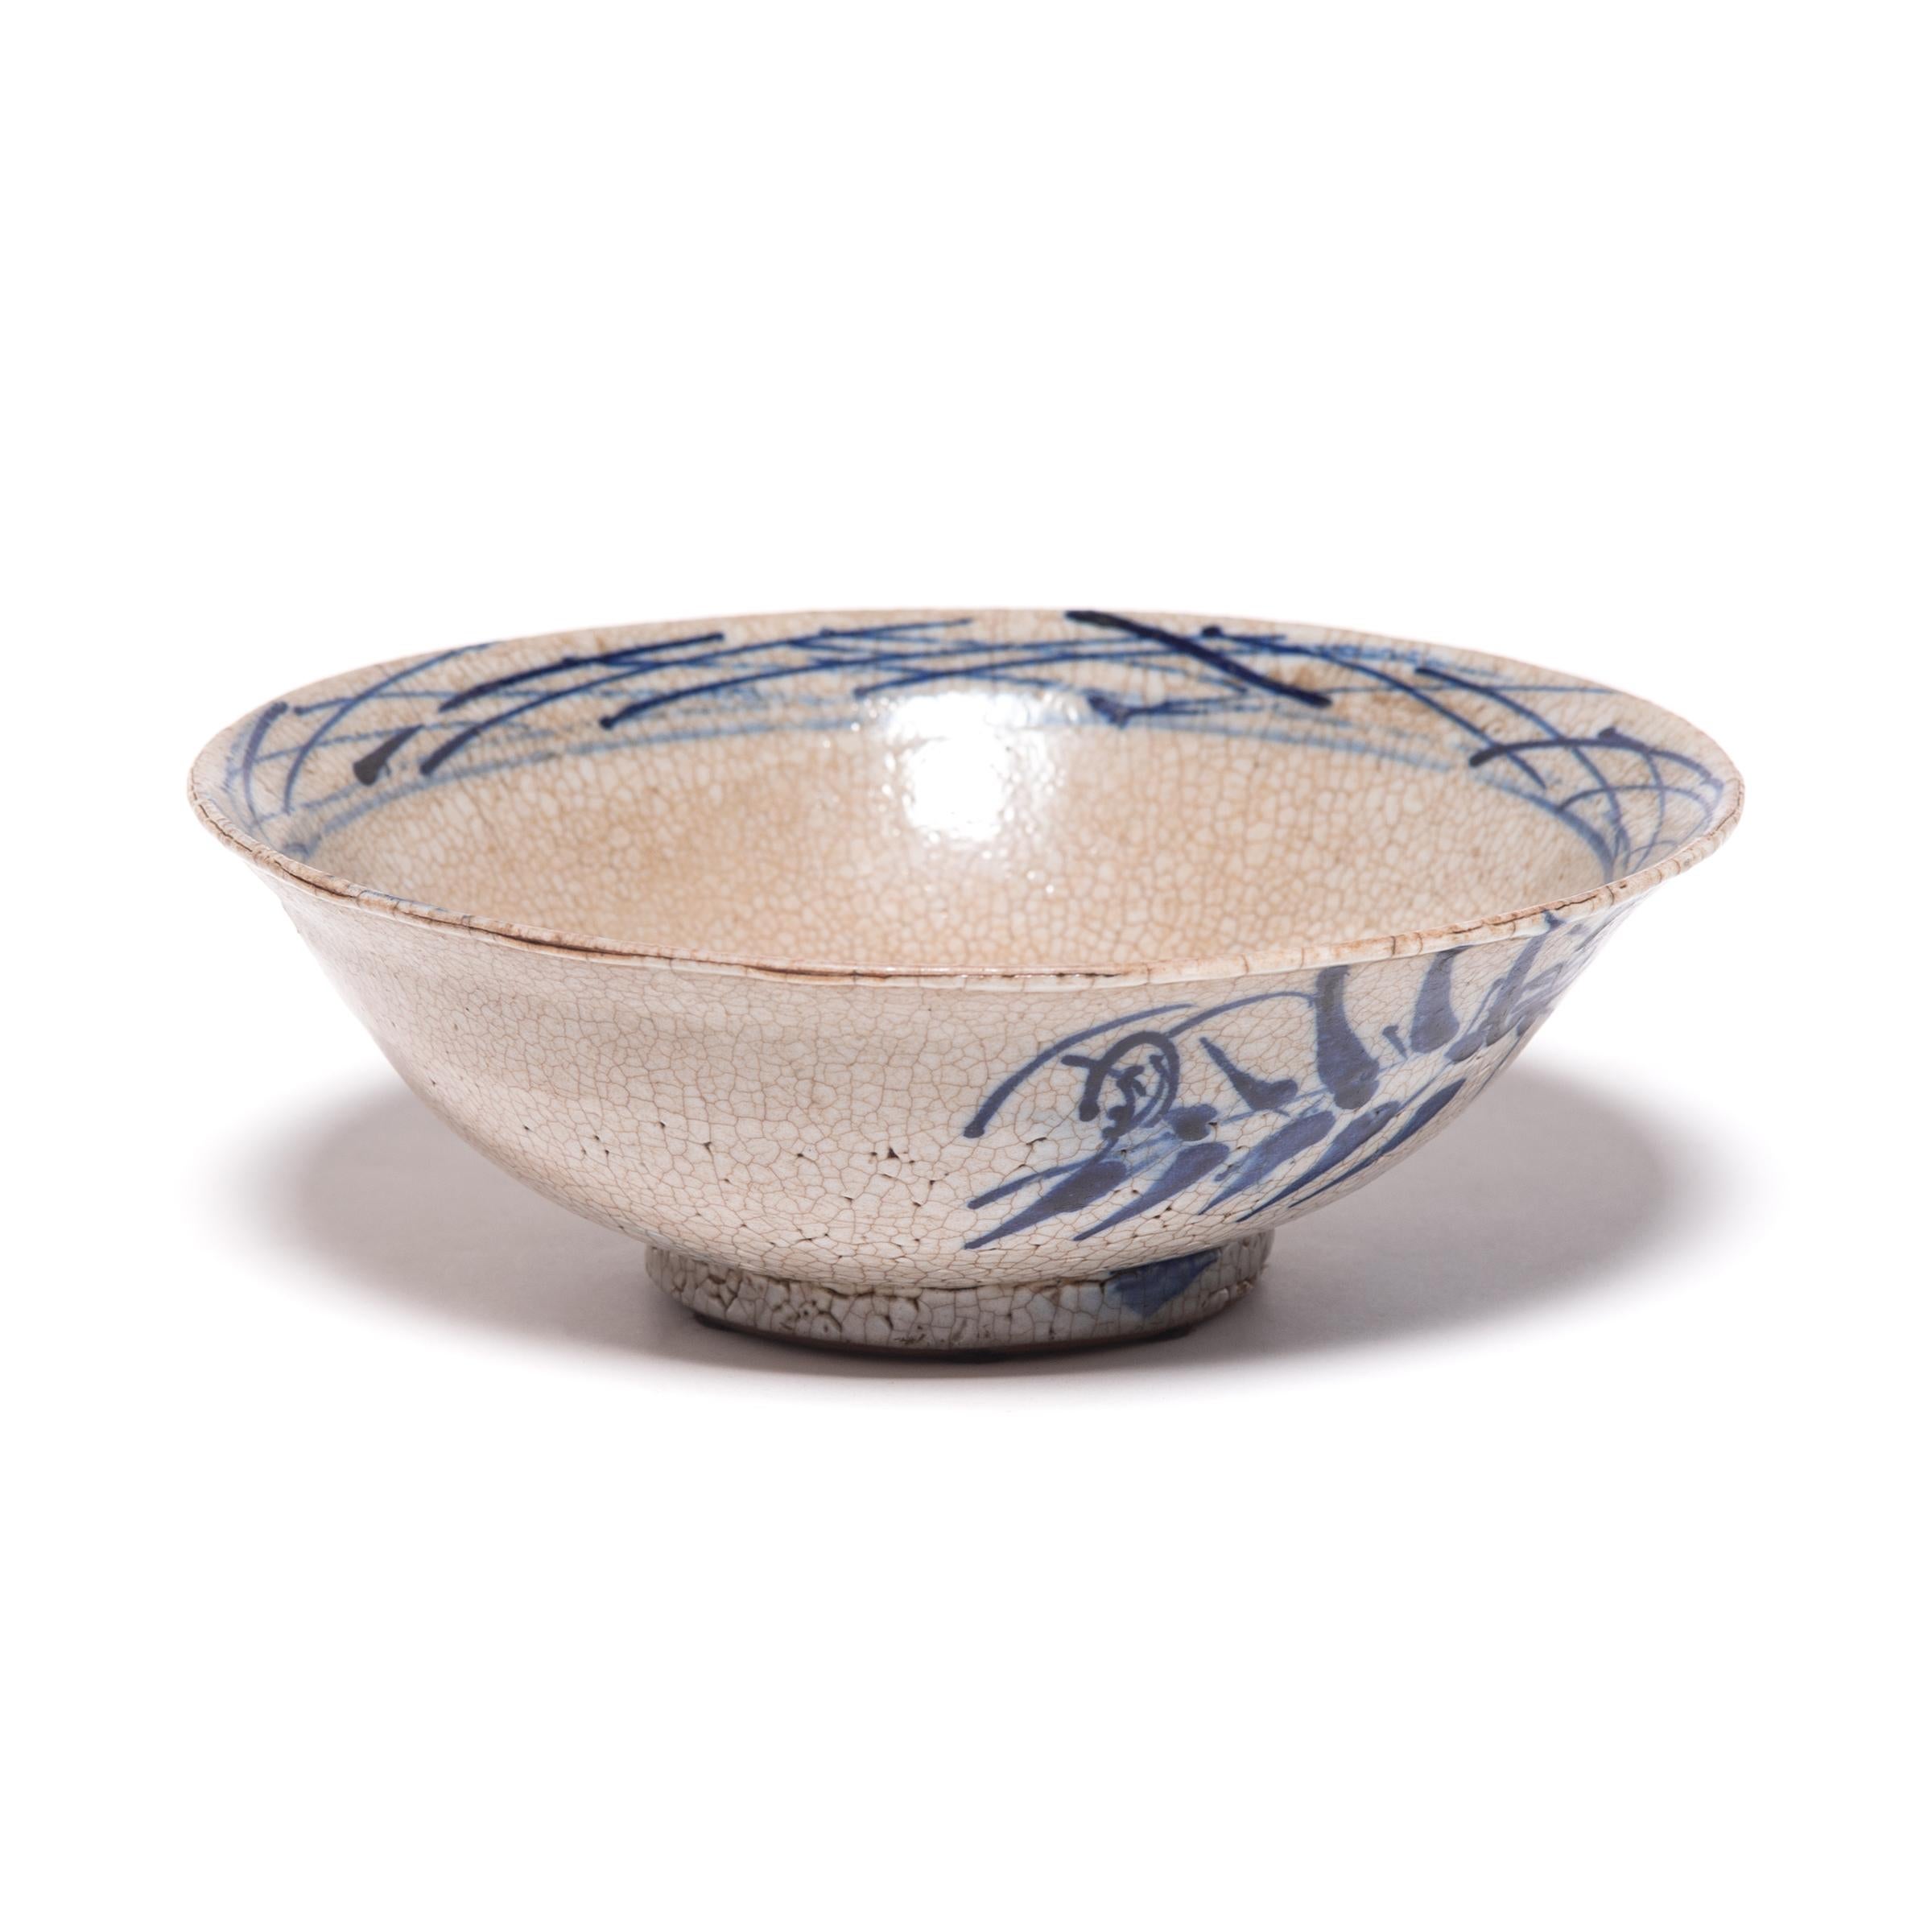 Glazed Early 19th Century Chinese Crackled Blue and White Bowl